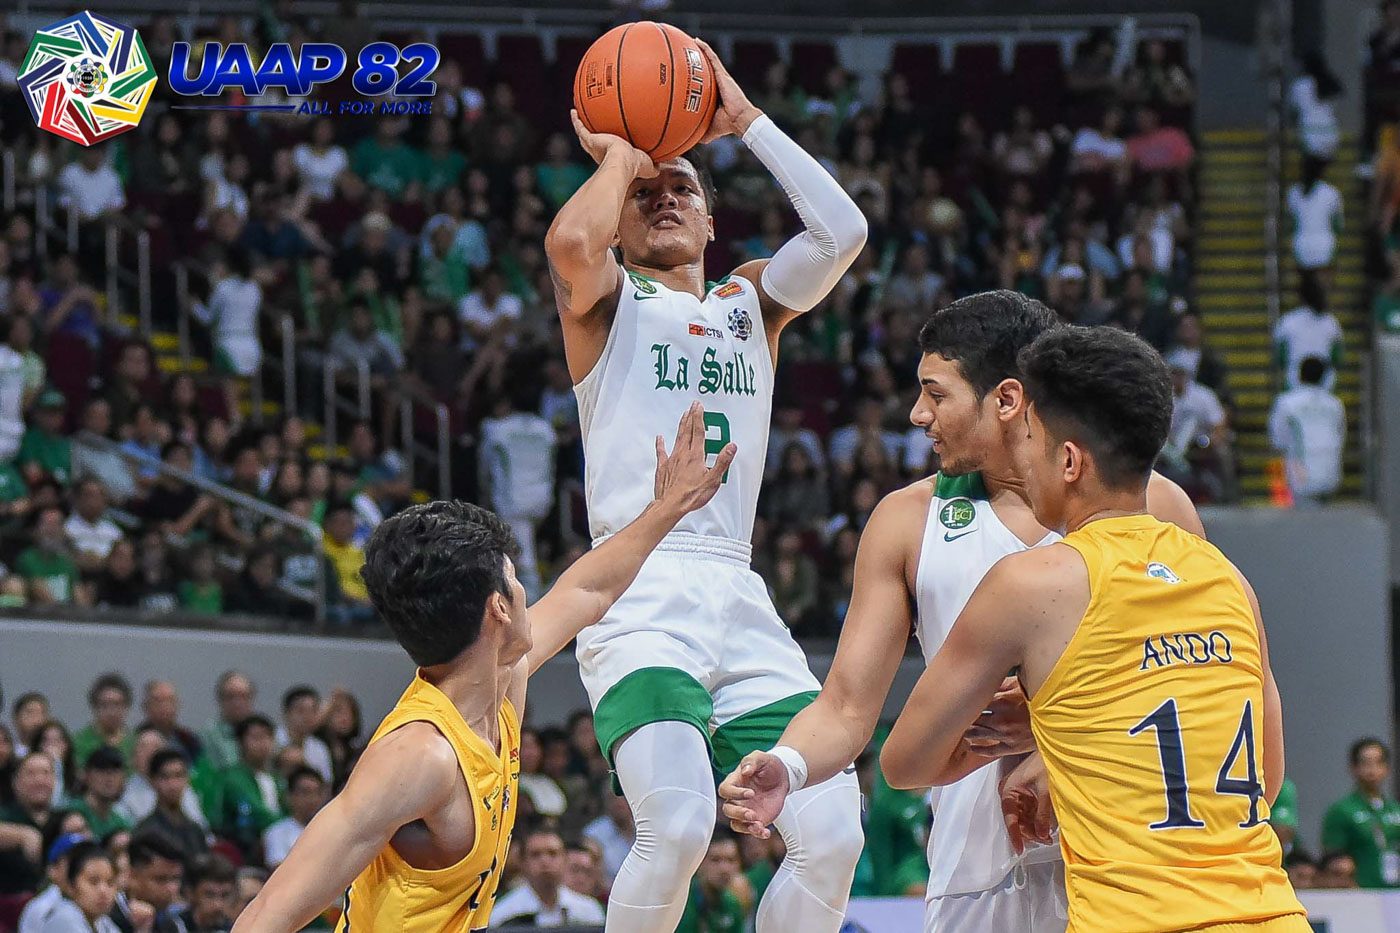 ON FIRE. La Salle gets off to a hot start against the UST Growling Tigers as Encho Serrano winds up posting a career-best 29 points. Photo release  